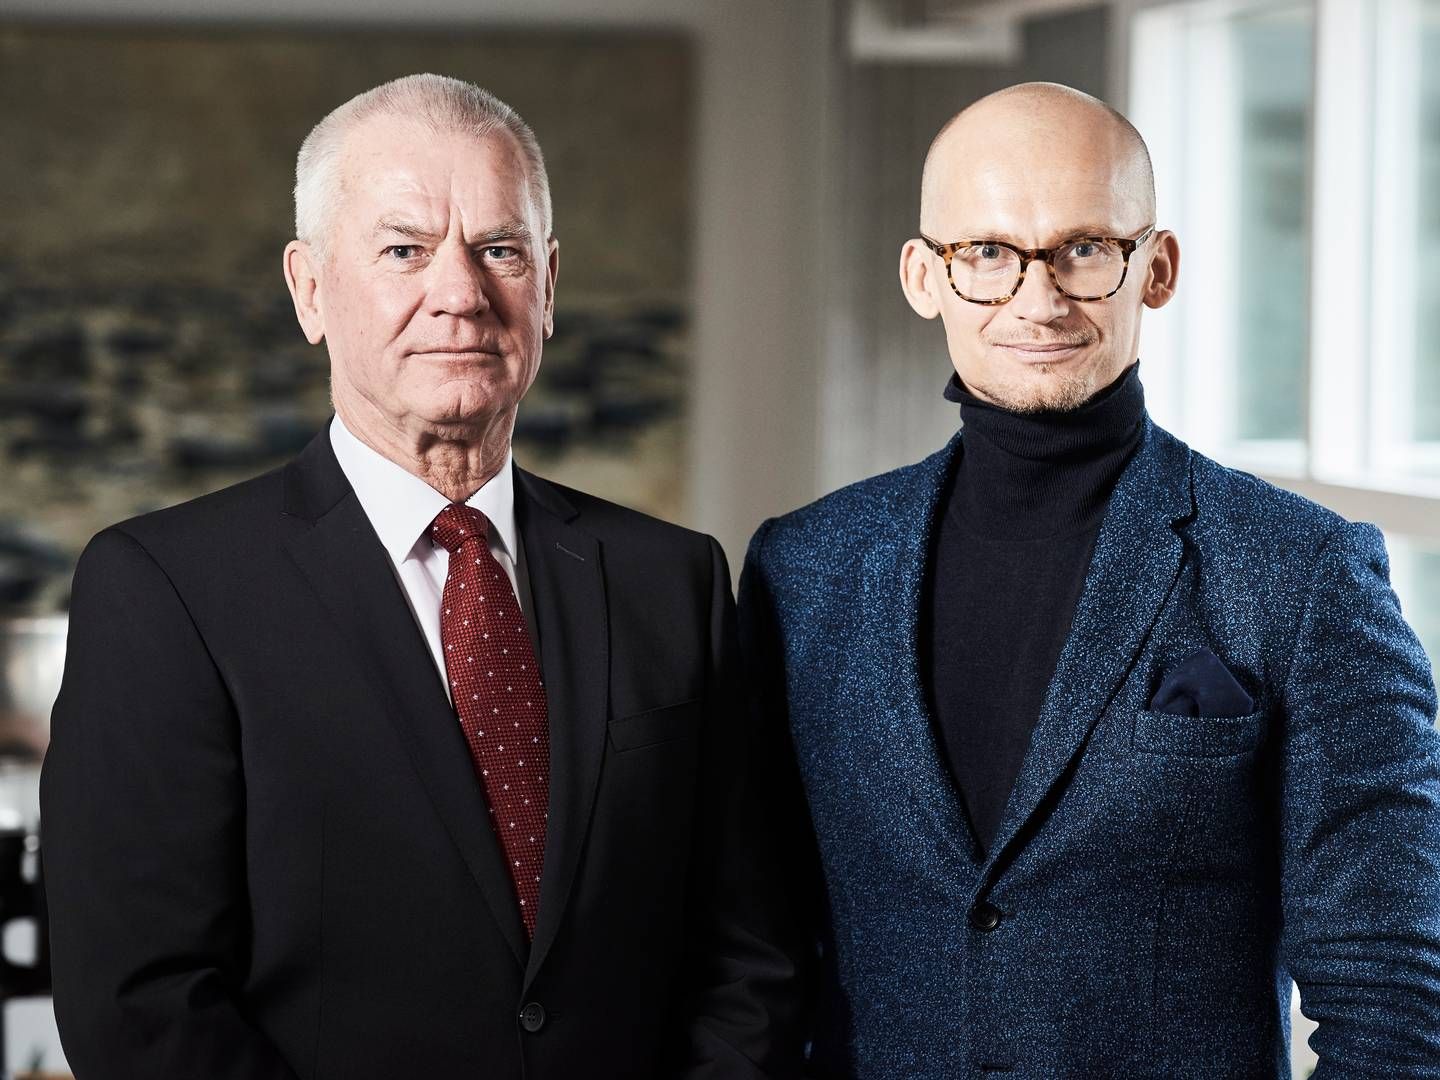 Thor Stadil (left) and Christian Stadil , who owns Thornico, will receive a hefty sum for selling their last shipping activities to Norden. | Photo: Pr / Thorco / Skovdal